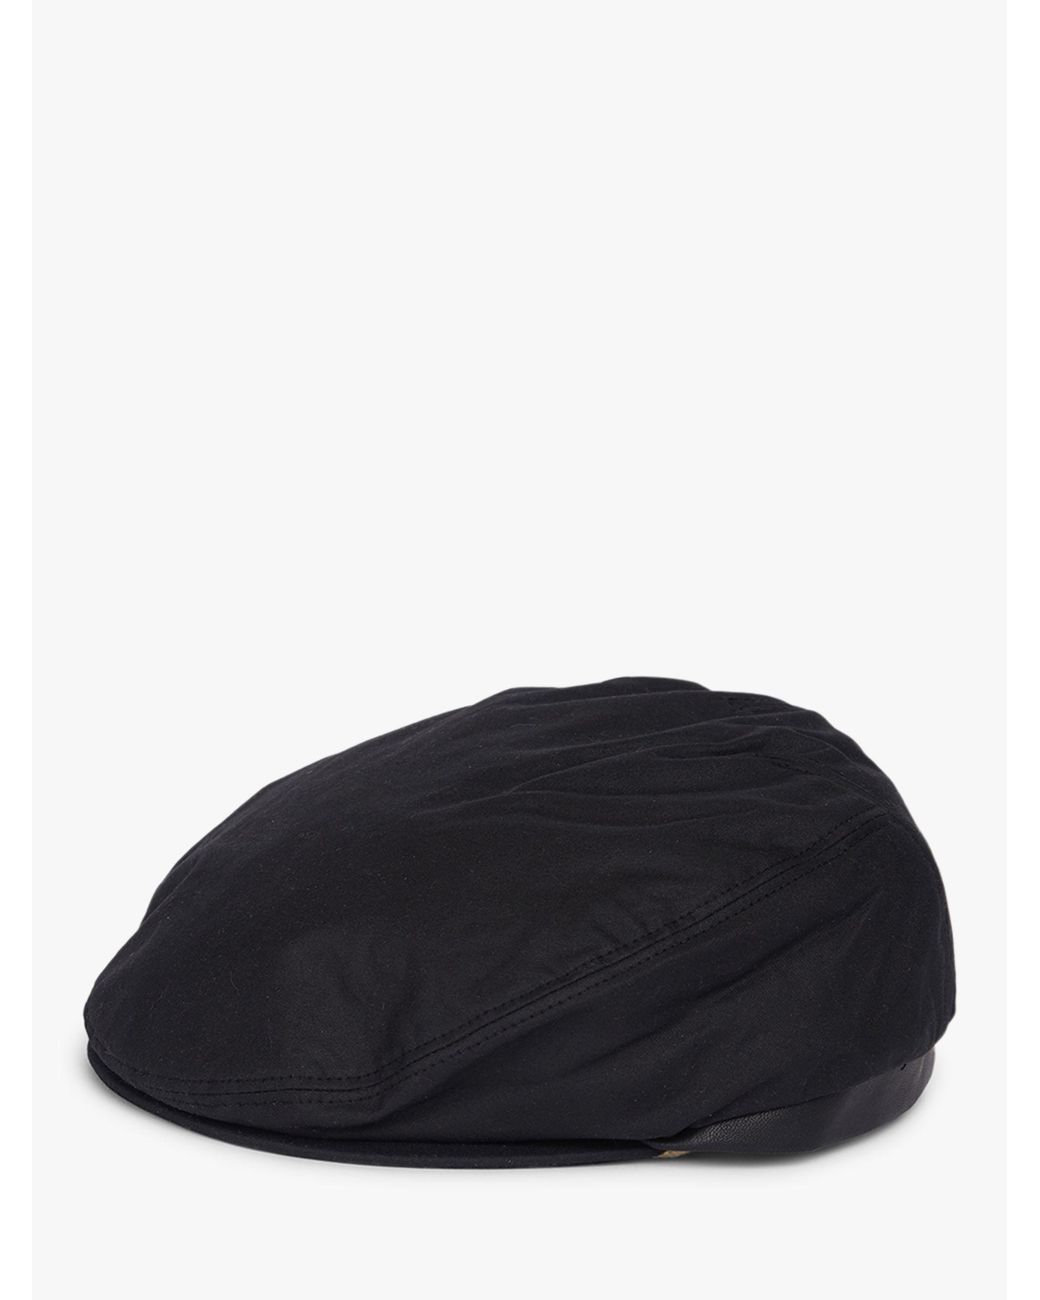 Barbour Land Rover Defender Waxed Cotton Flat Cap in Black for Men | Lyst UK